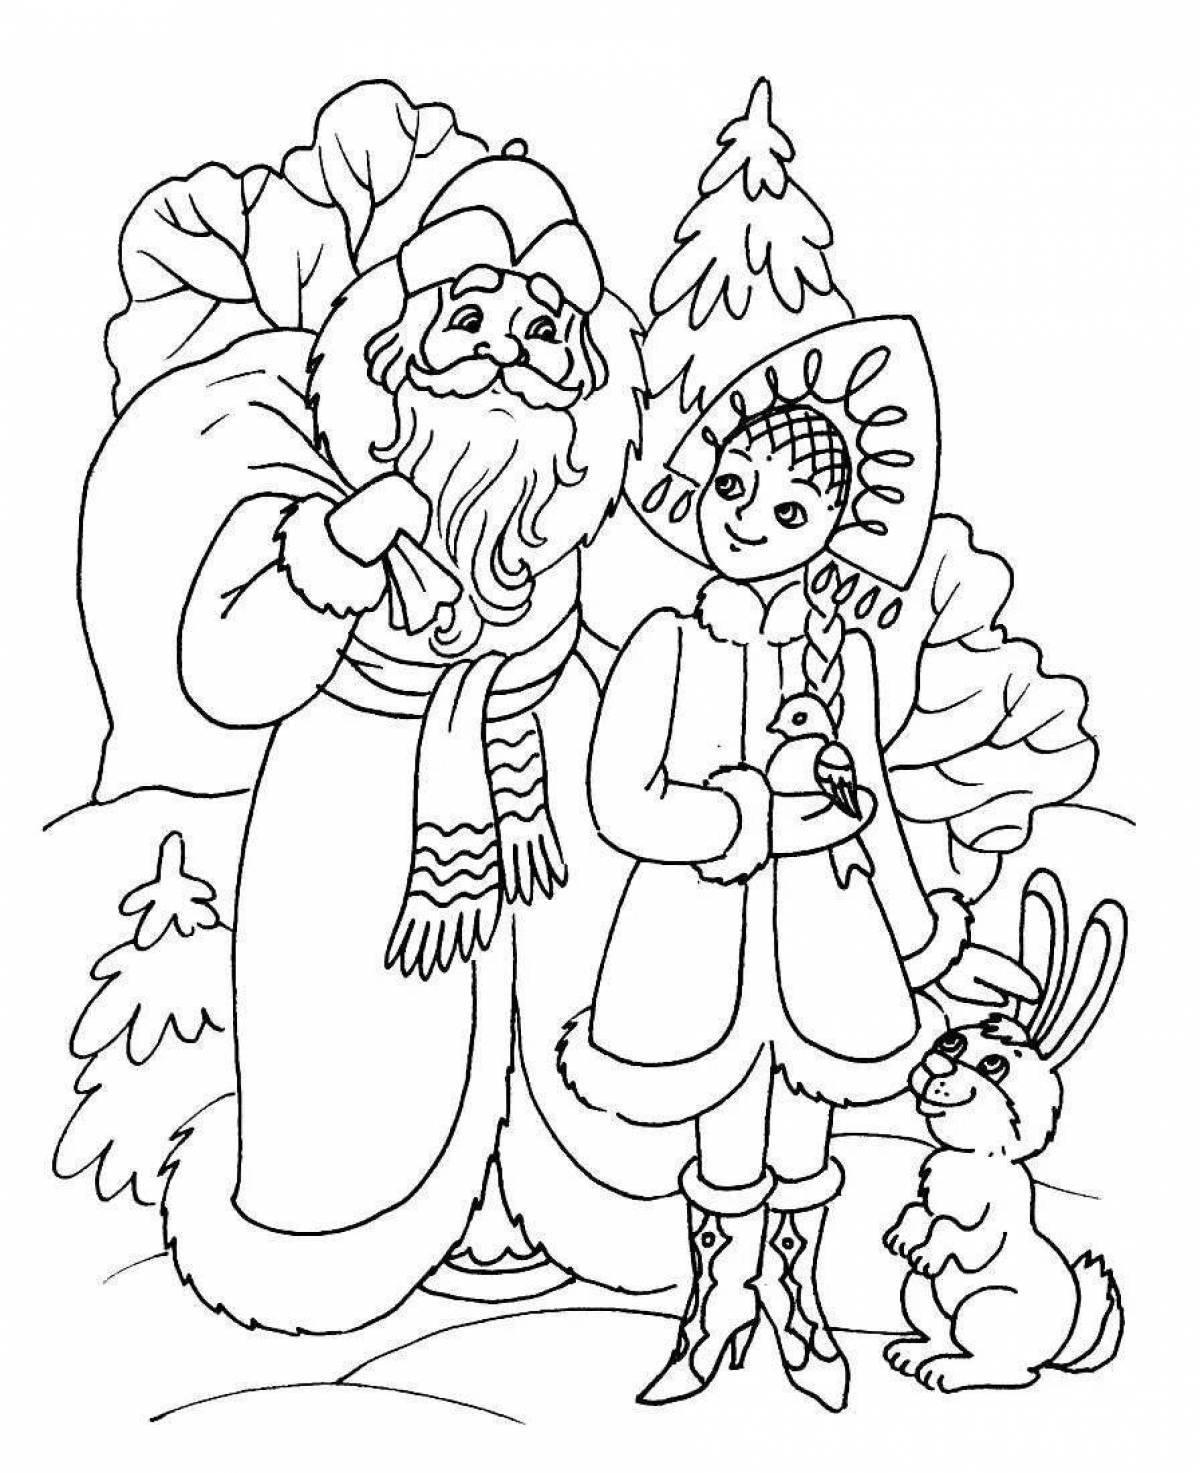 Luxury coloring book Santa Claus and Snow Maiden